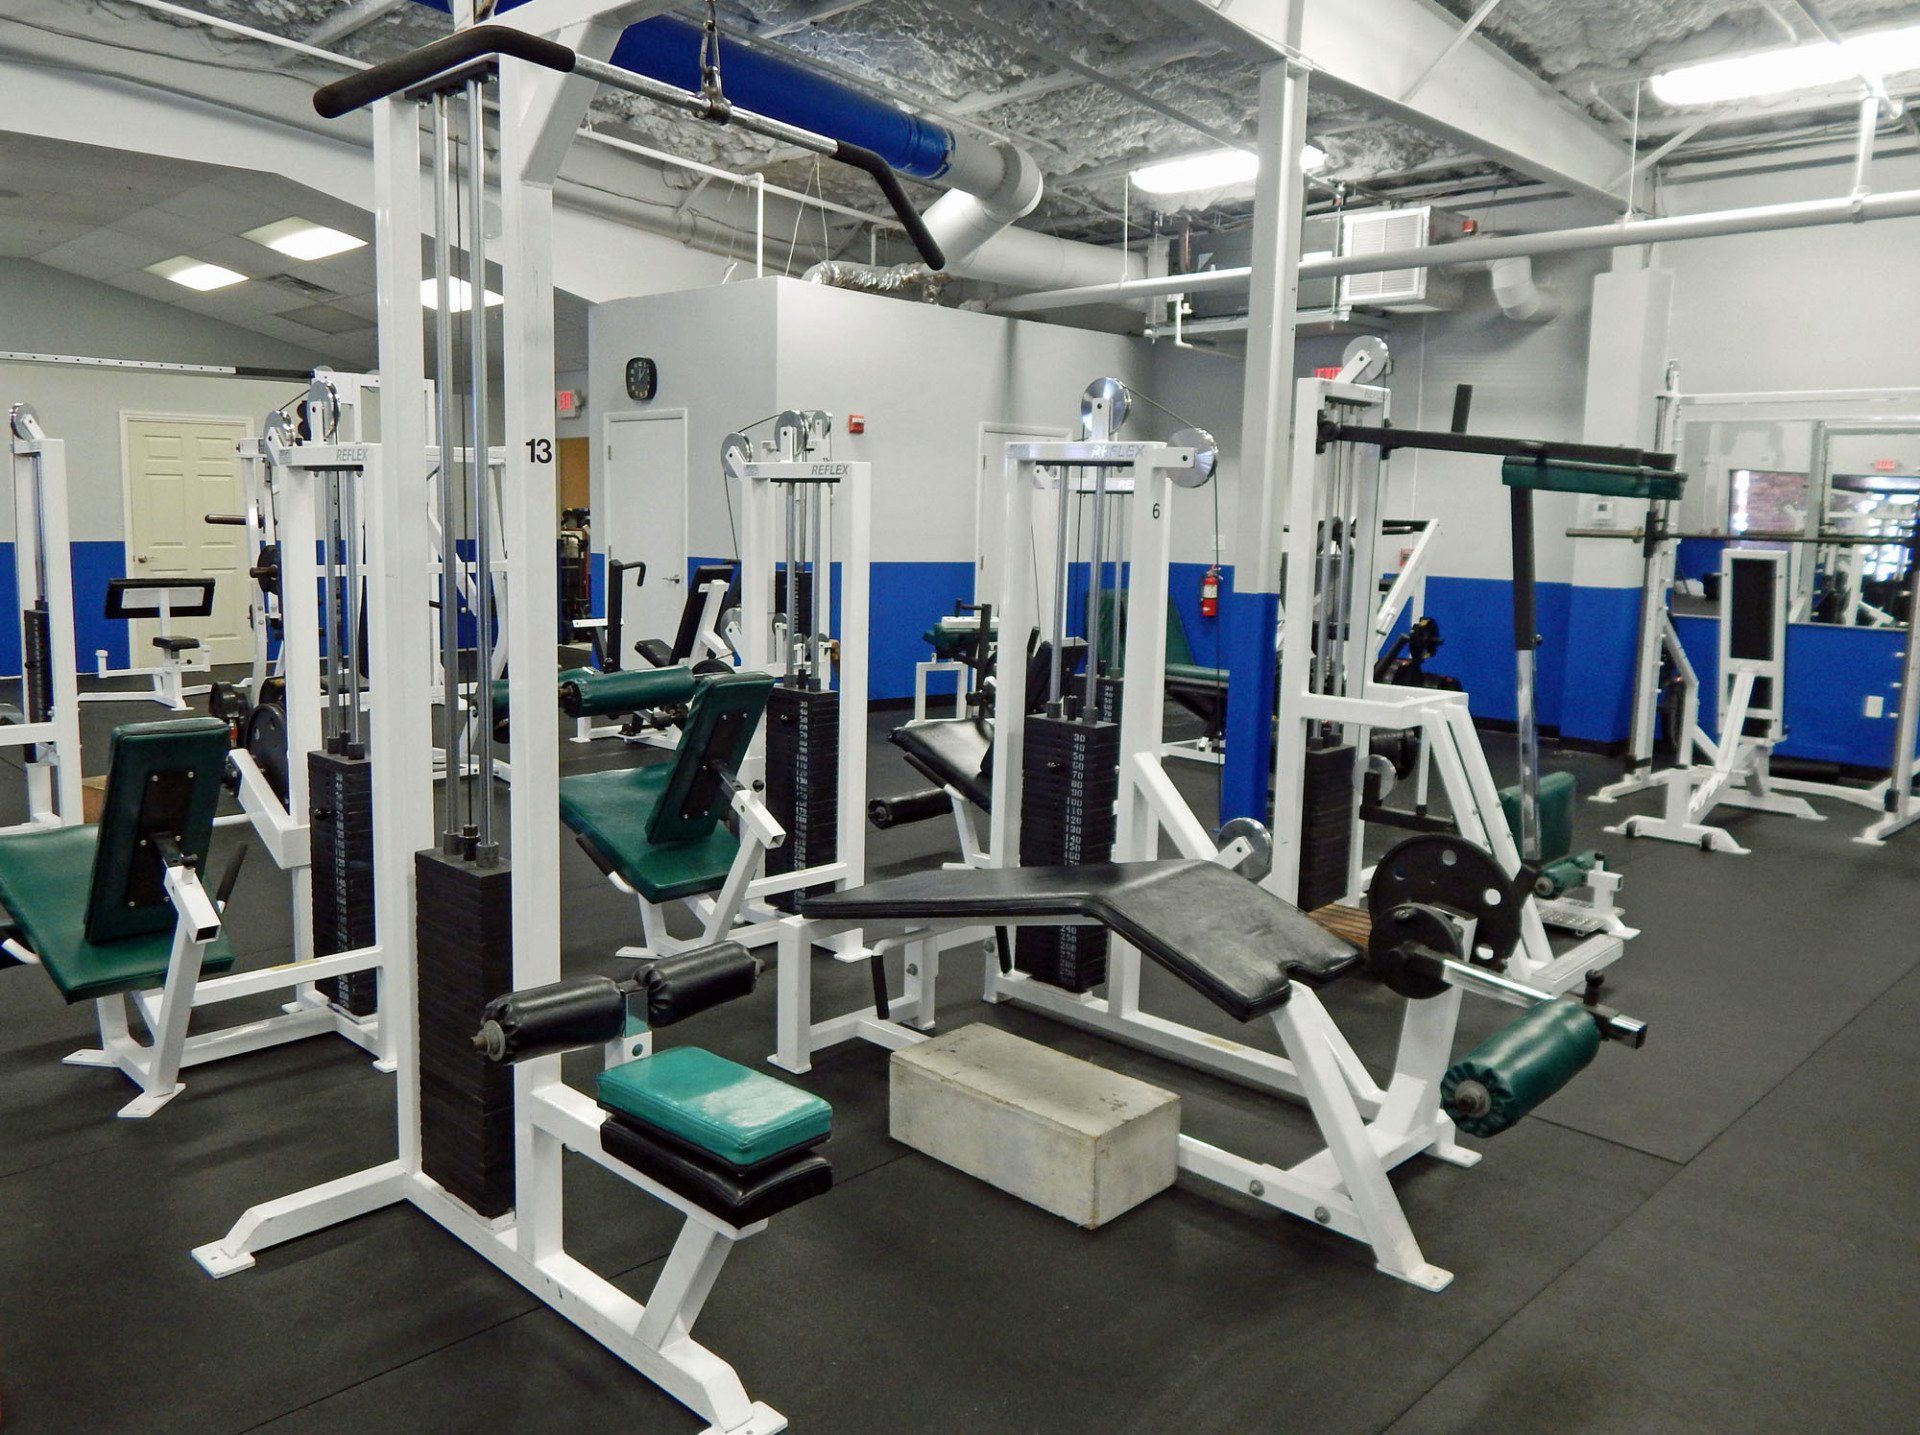 Venice Fitness Gym: Personal Trainers, Physical Therapy & Rehab